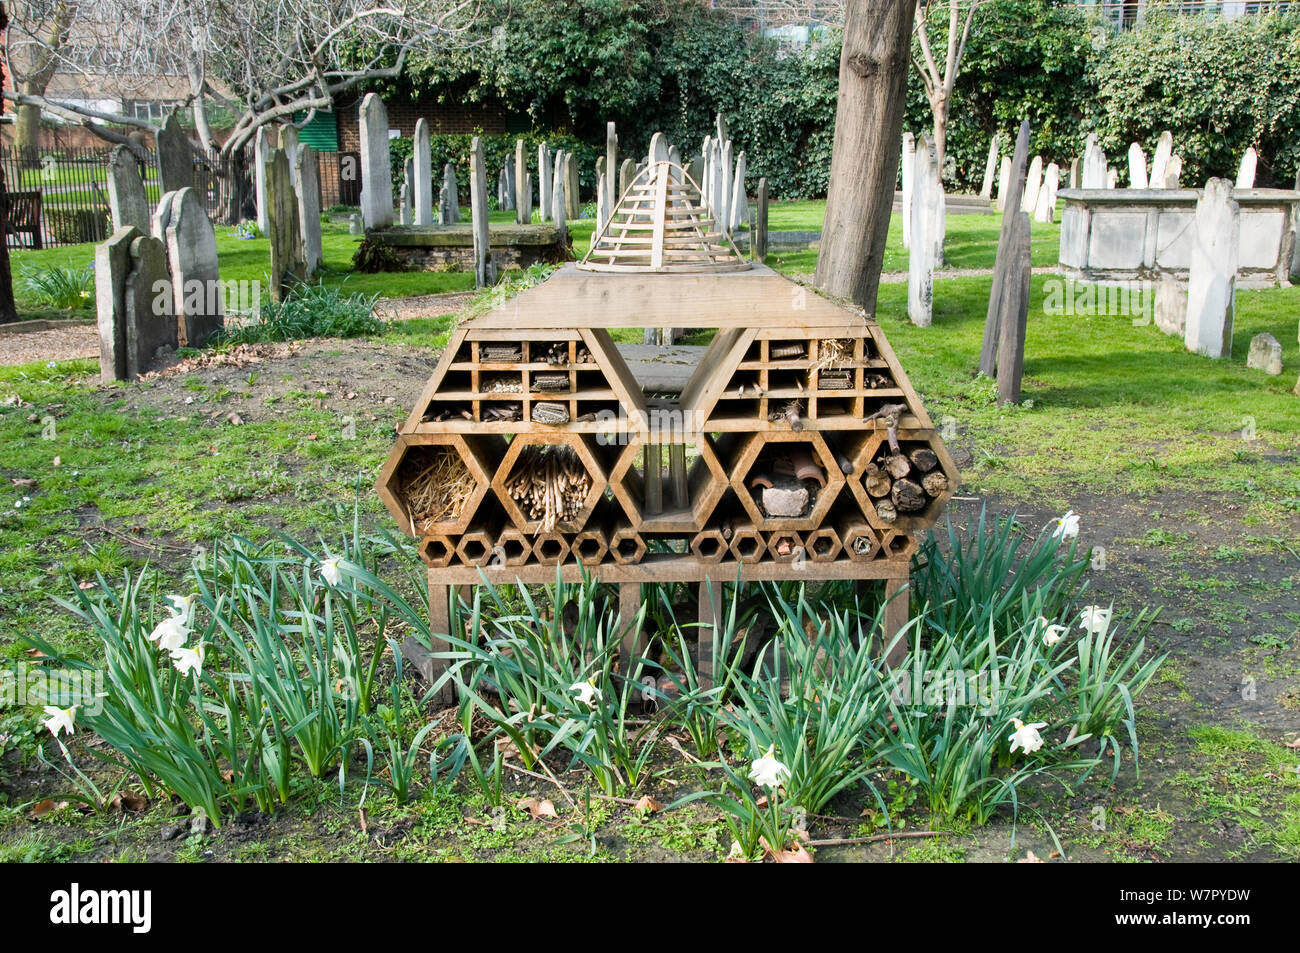 'Innvertebrate', the Boutique Bug Hotel or Insect House situated amongst gravestones, Bunhill Fields Burial Ground or Cemetery, London Borough of Islington, London, England, UK Stock Photo